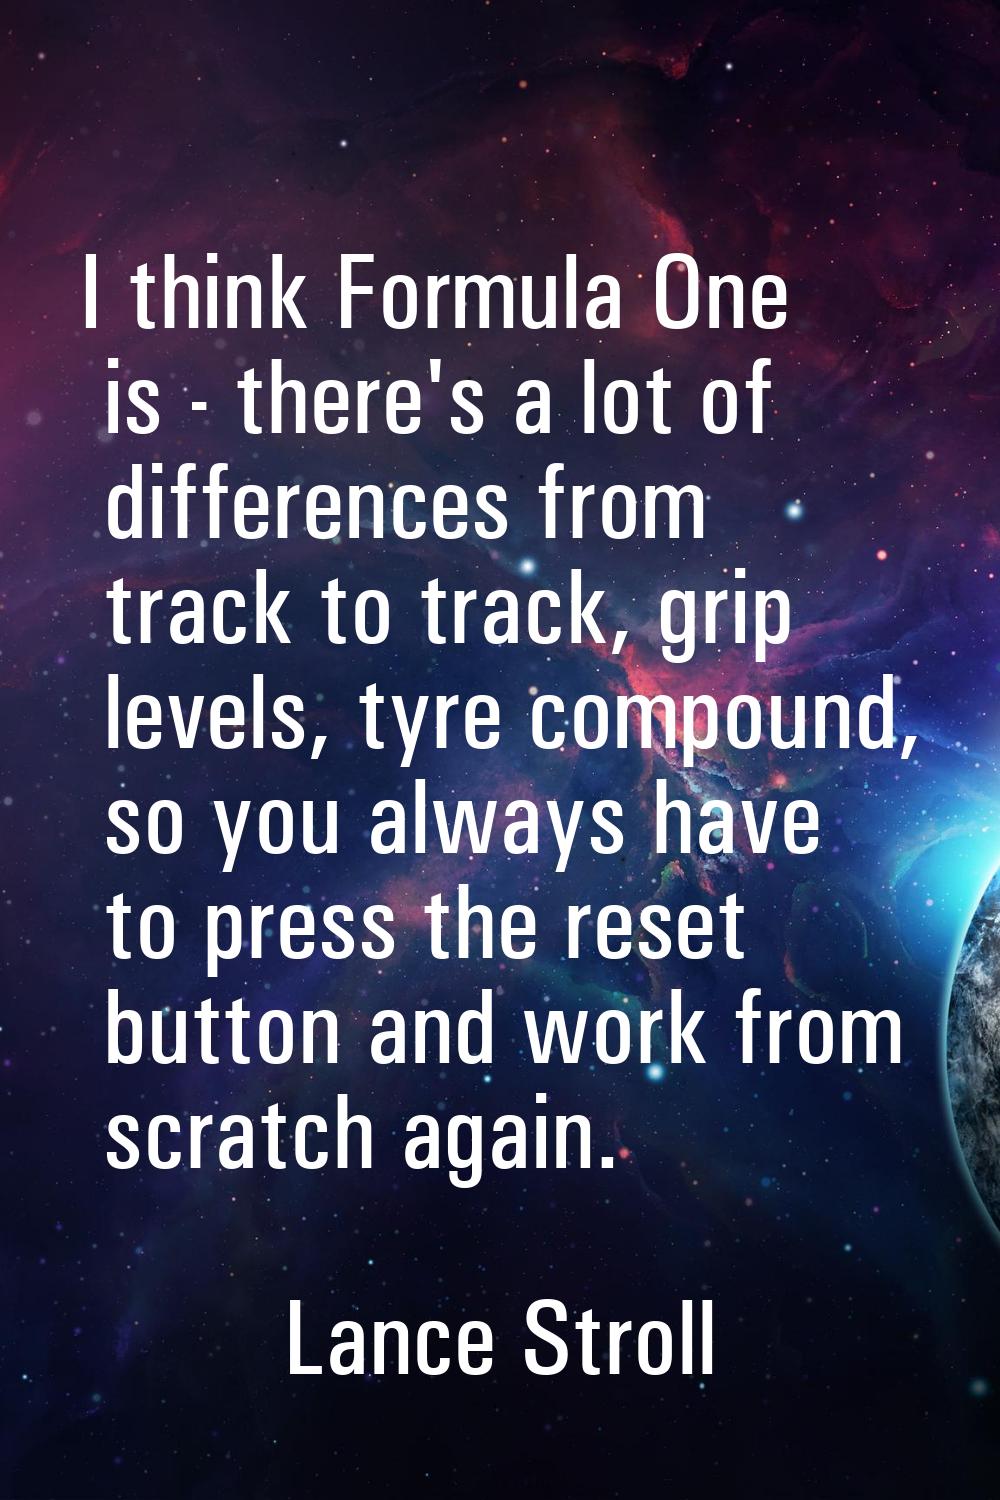 I think Formula One is - there's a lot of differences from track to track, grip levels, tyre compou